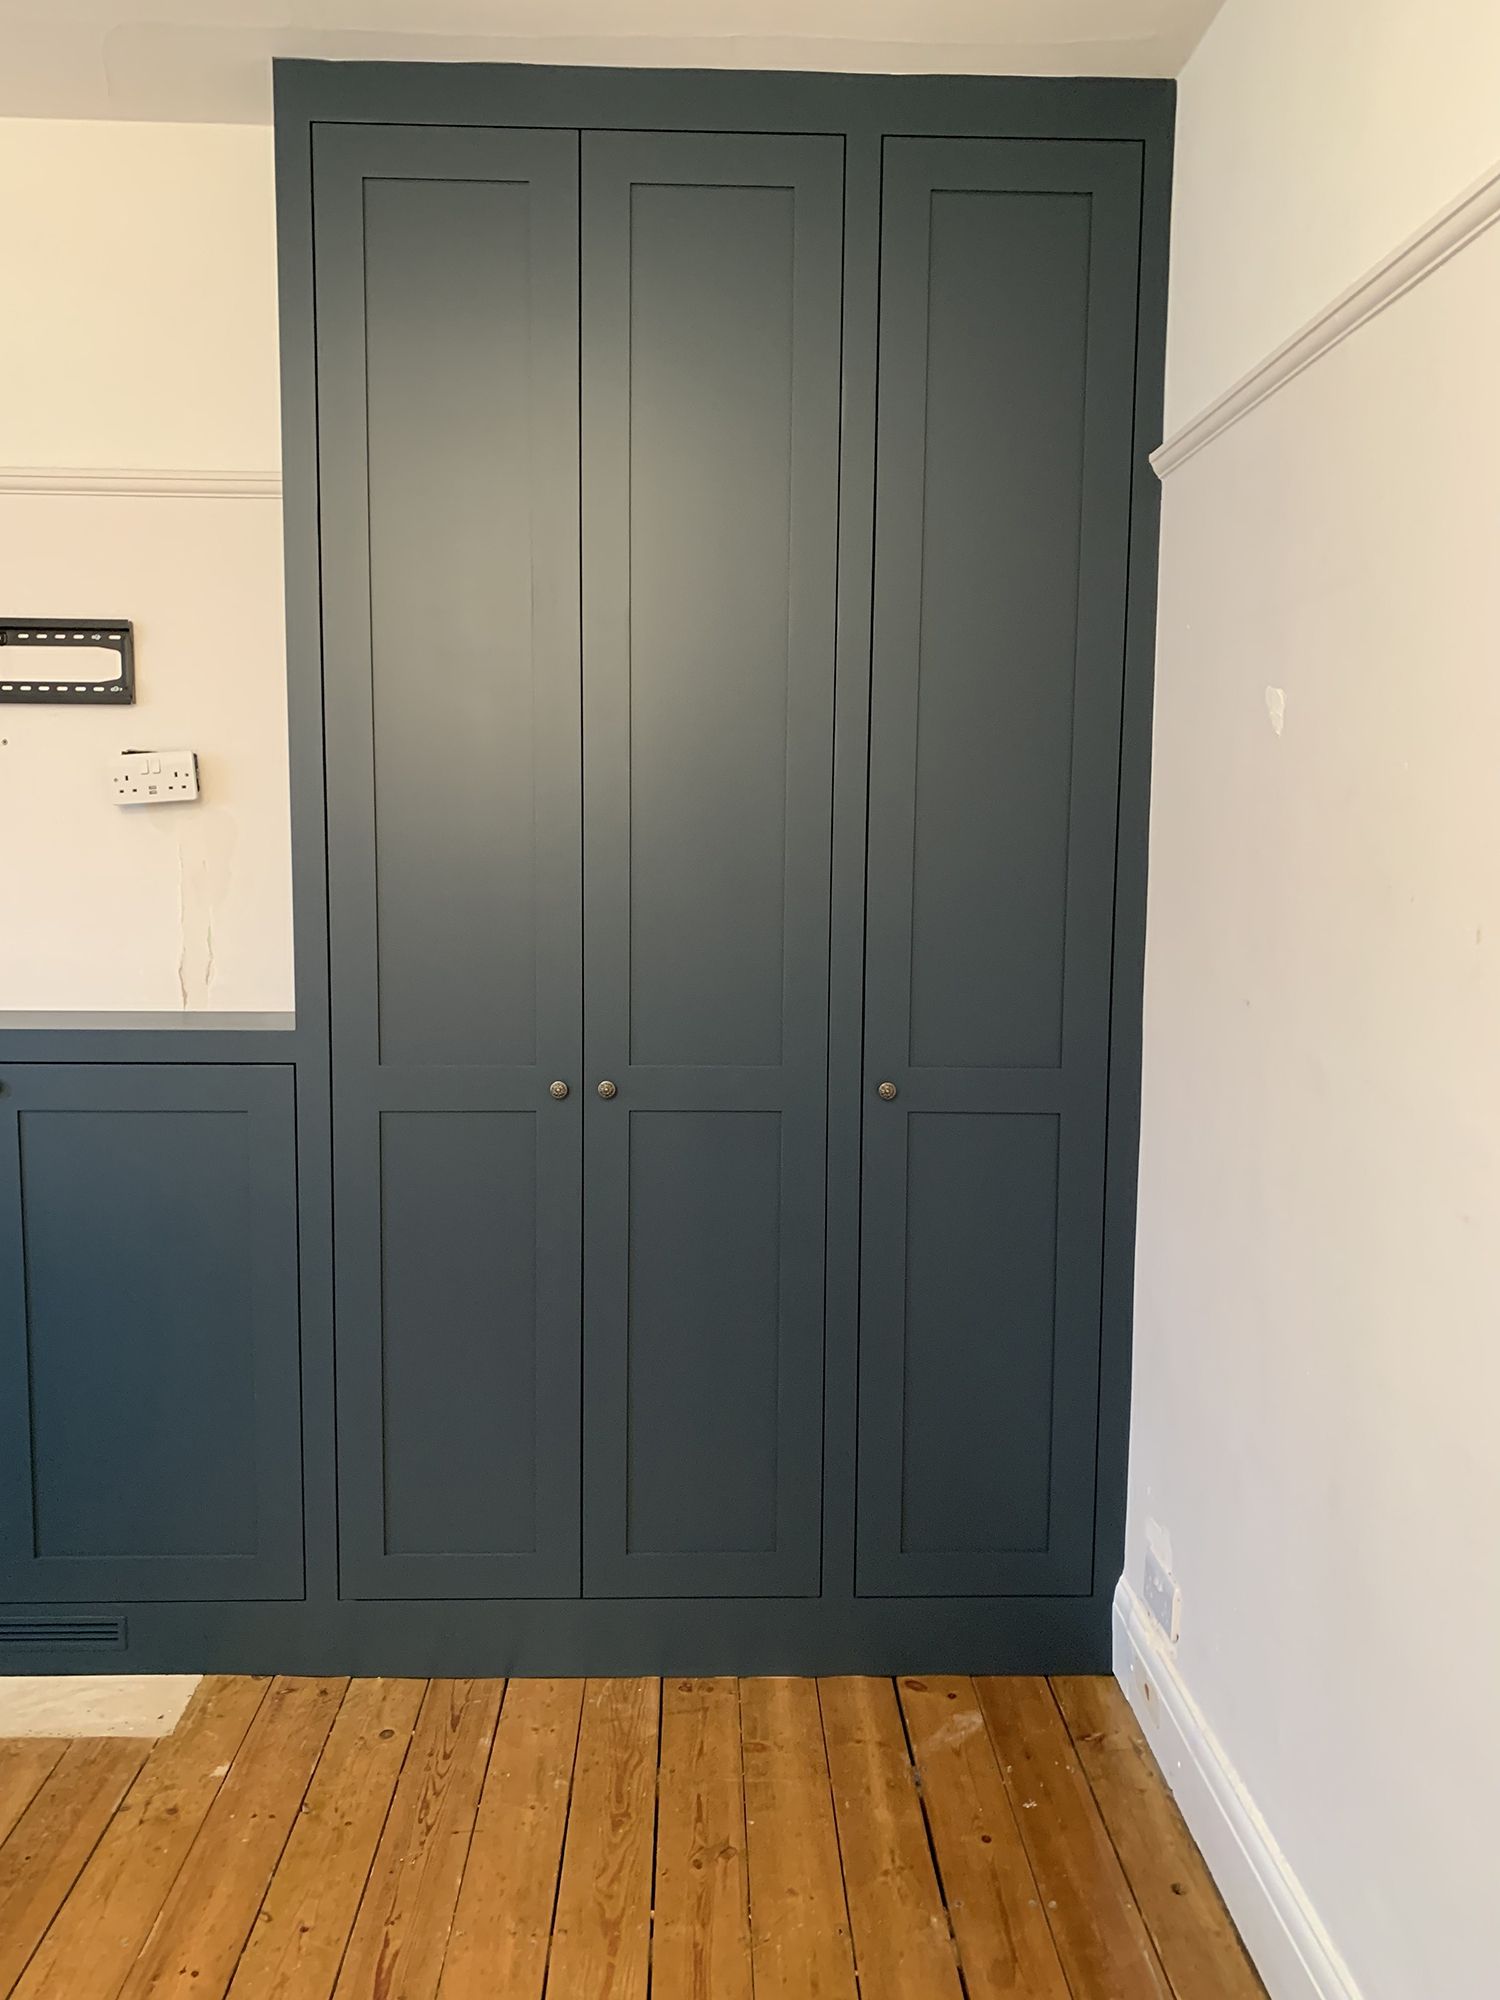 Bespoke Fitted Wardrobes – Jh Carpentry Within Farrow And Ball Painted Wardrobes (Gallery 17 of 20)